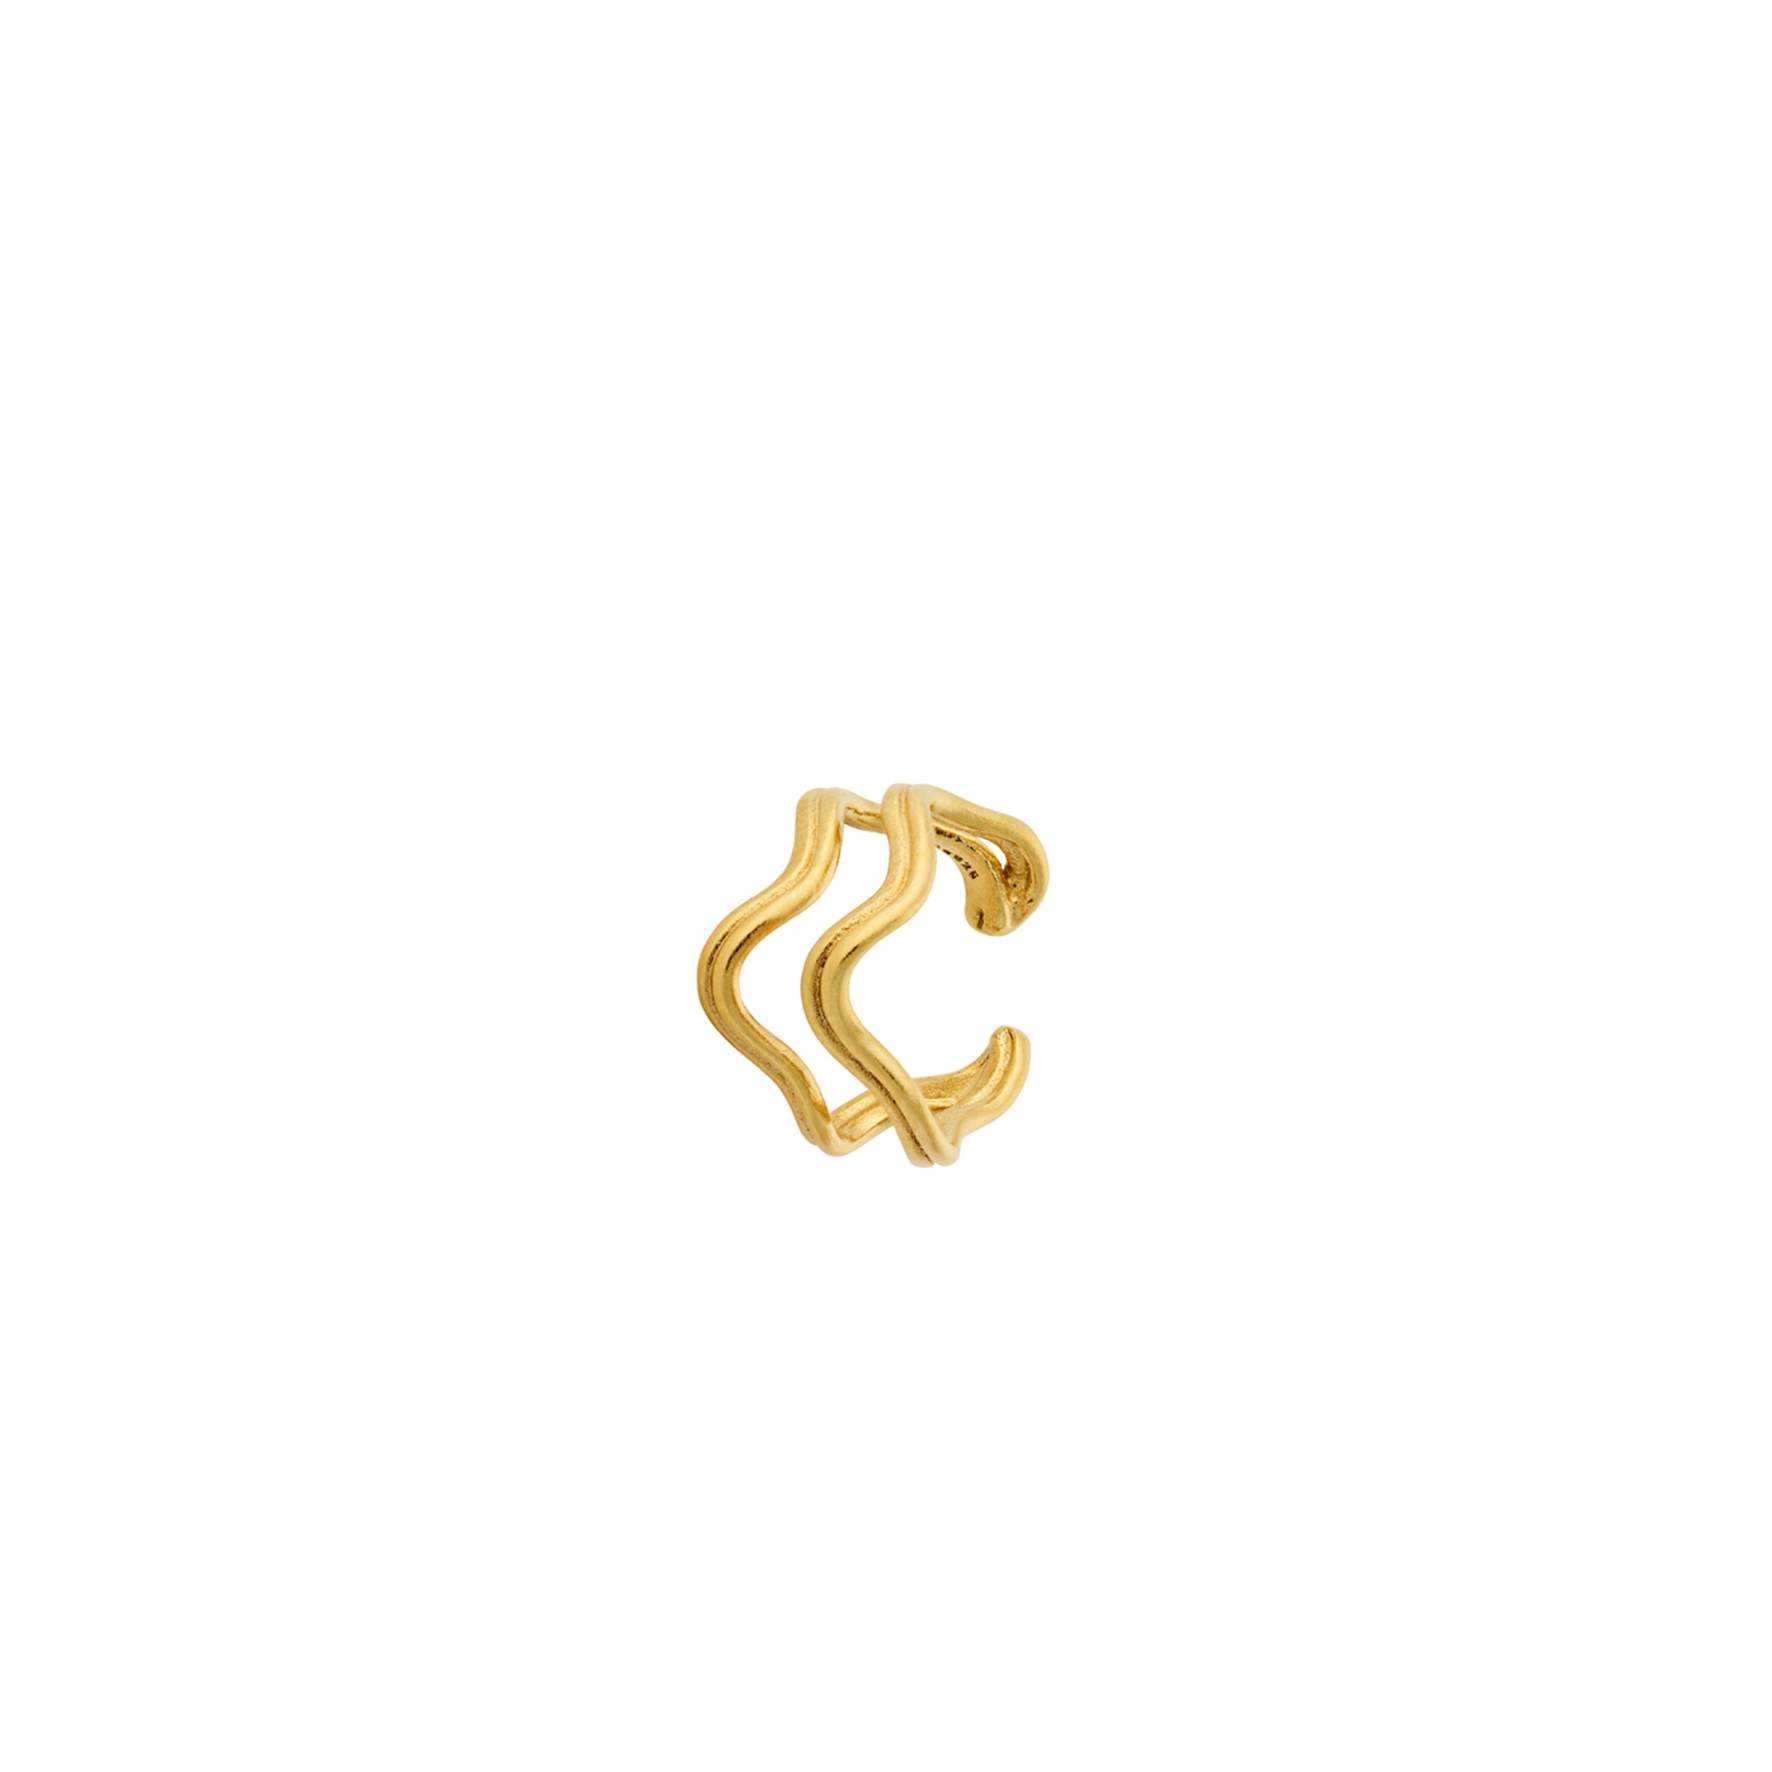 Double Wave Earcuff from Pernille Corydon in Goldplated-Silver Sterling 925